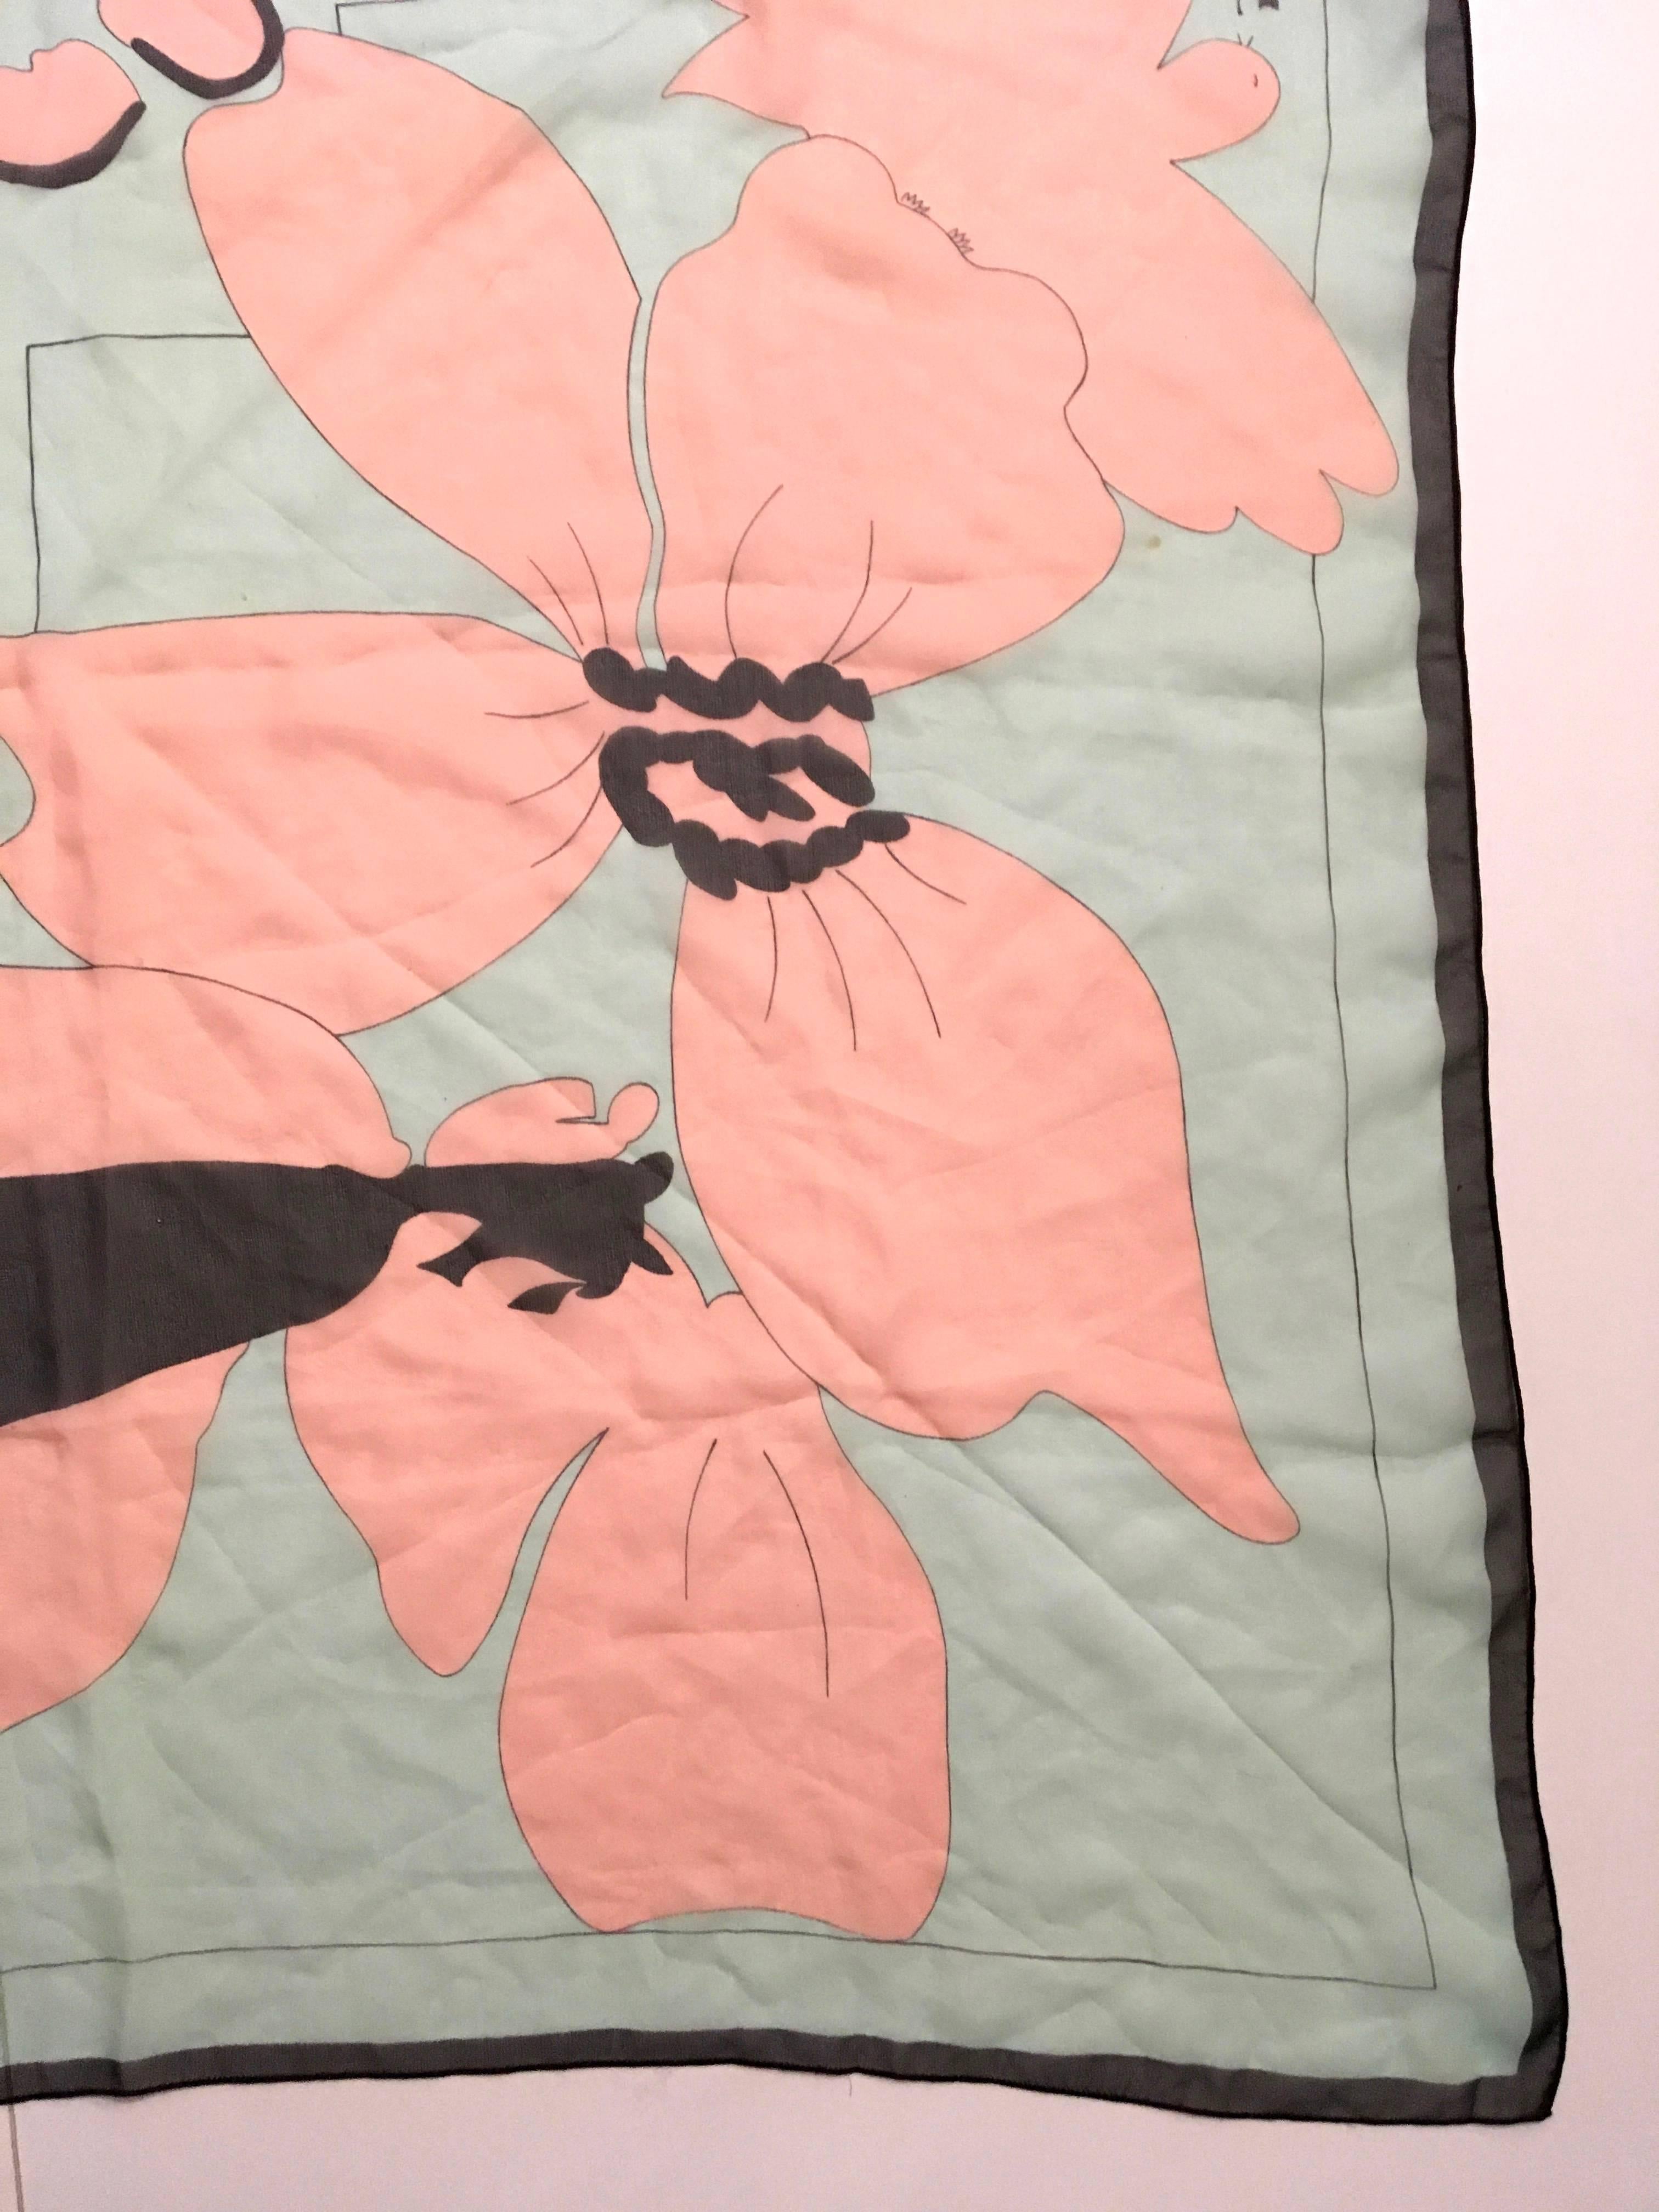 Presented here is a scarf from Courreges Paris. This beautiful scarf is made from 100% silk musselin. The scarf is a floral print and is comprised of pink and black colored flowers against a light blue background. The images are all framed by a